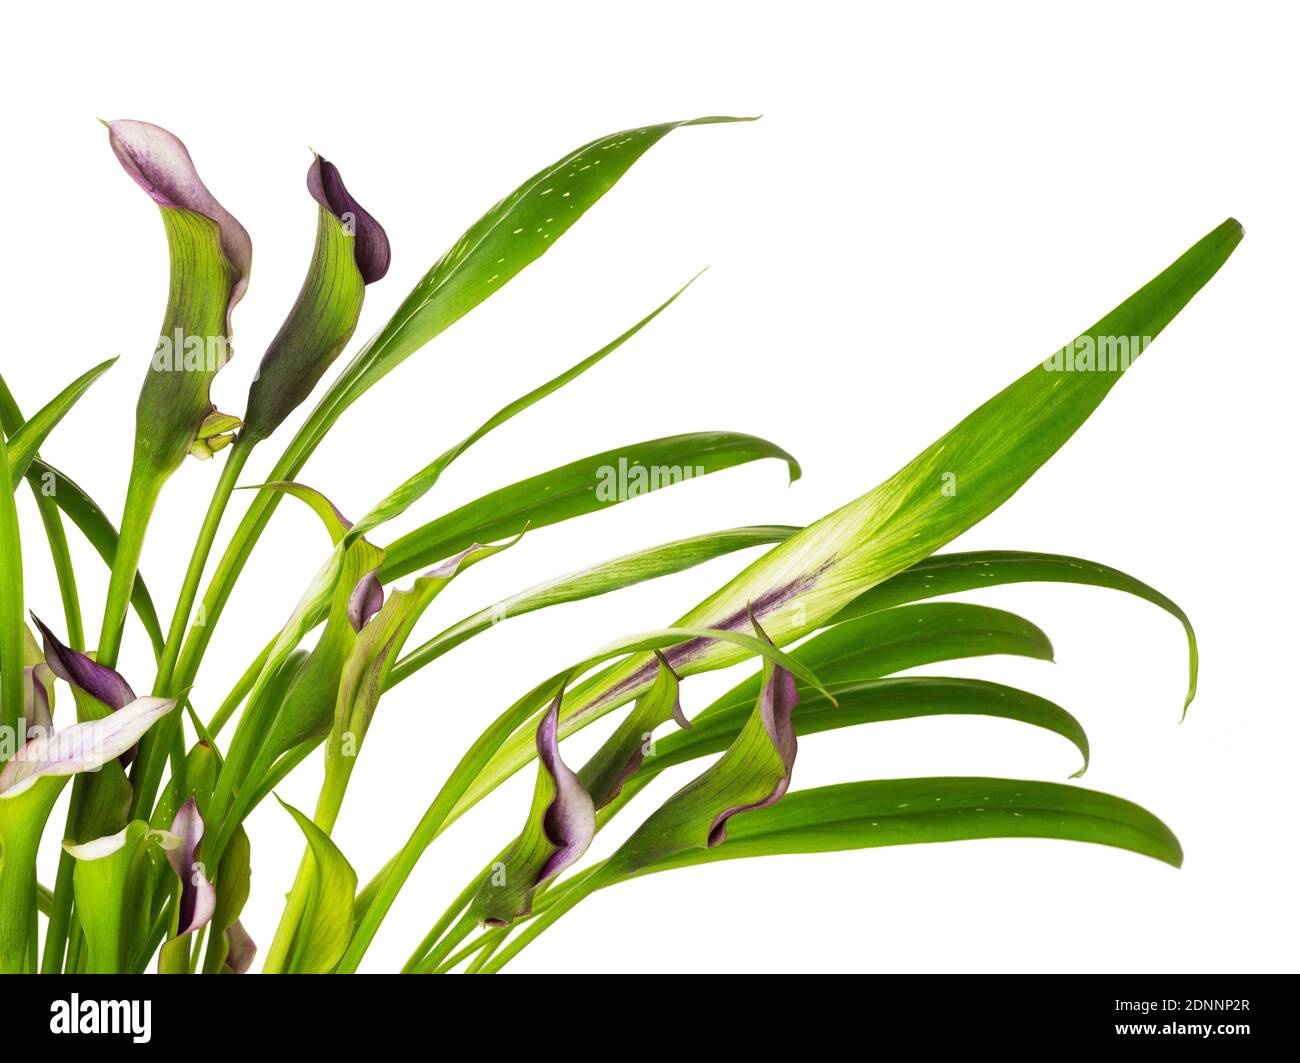 beautiful Clump of Calla Lily purple and pink flowers isolated on white background good for happy new year card Stock Photo